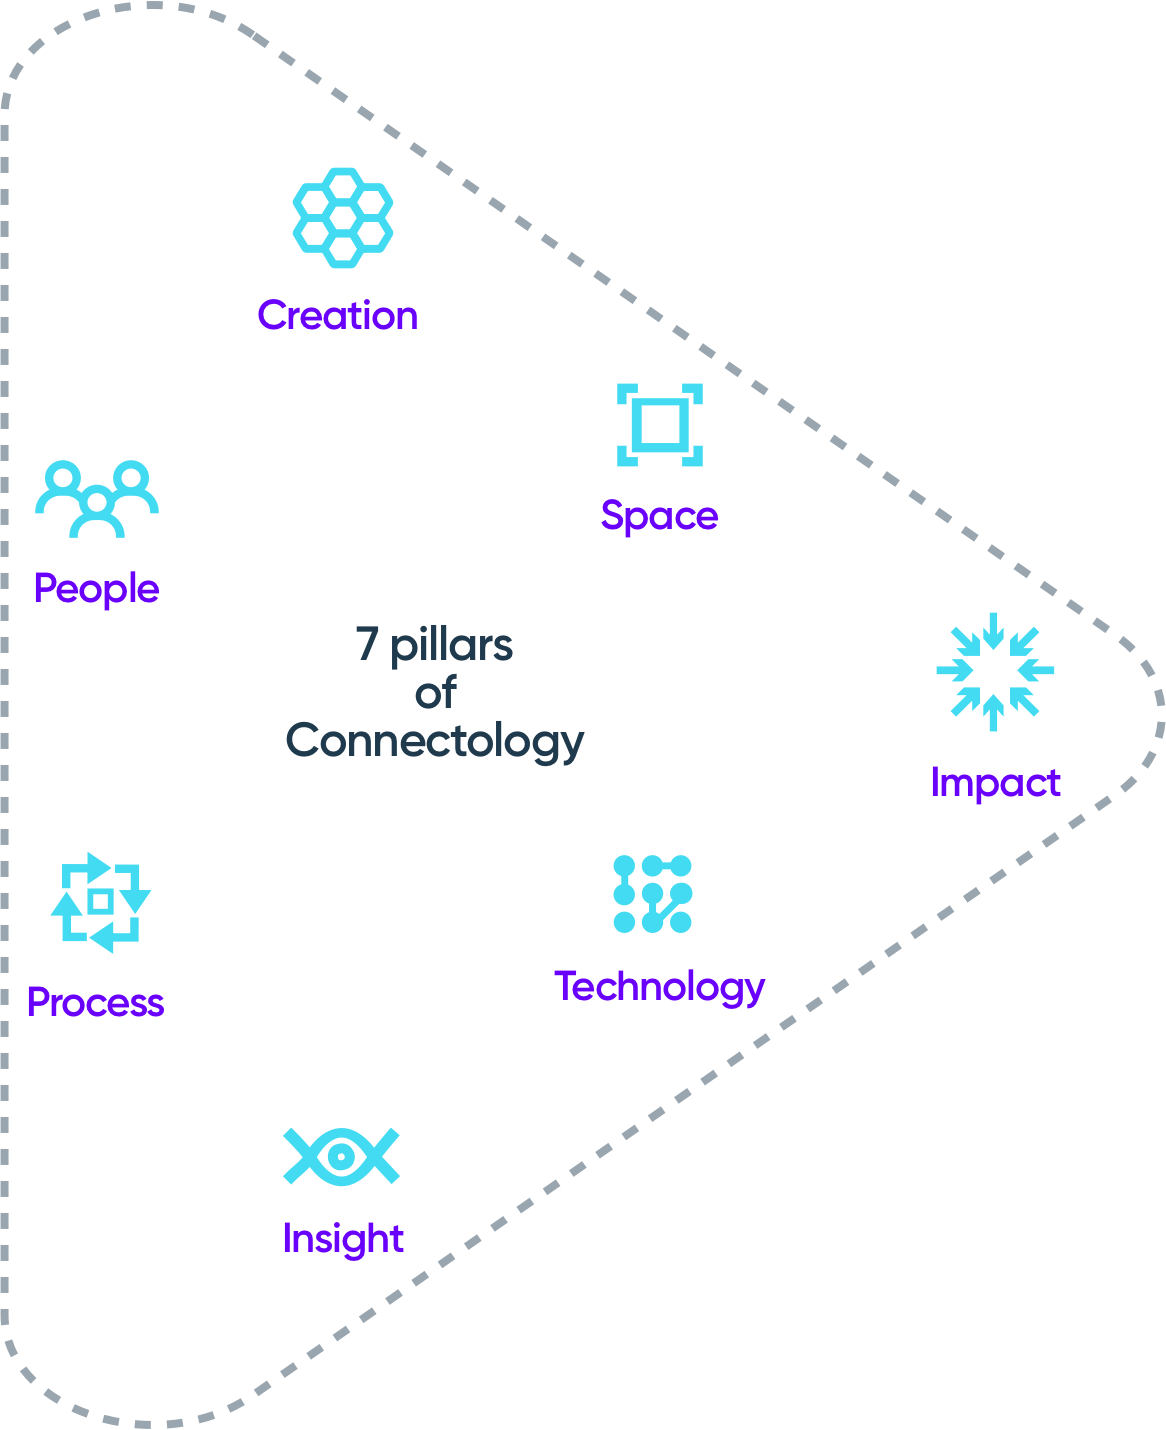 Discover the Connectology model<